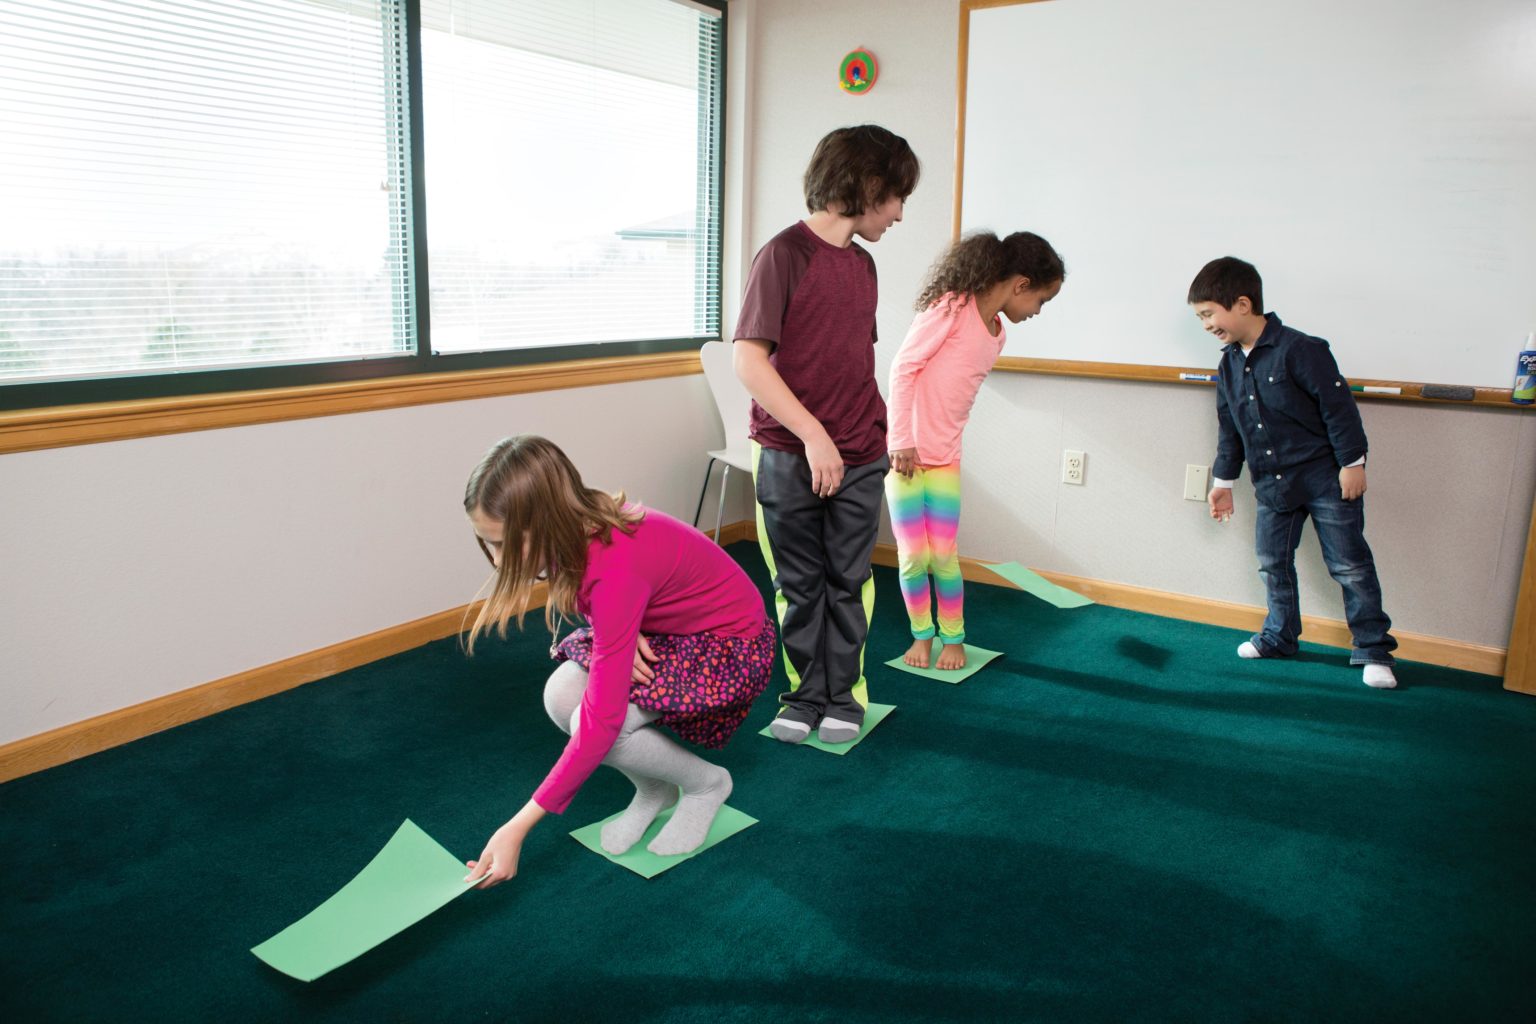 Children in a line, placing green paper on the ground as stepping stones.